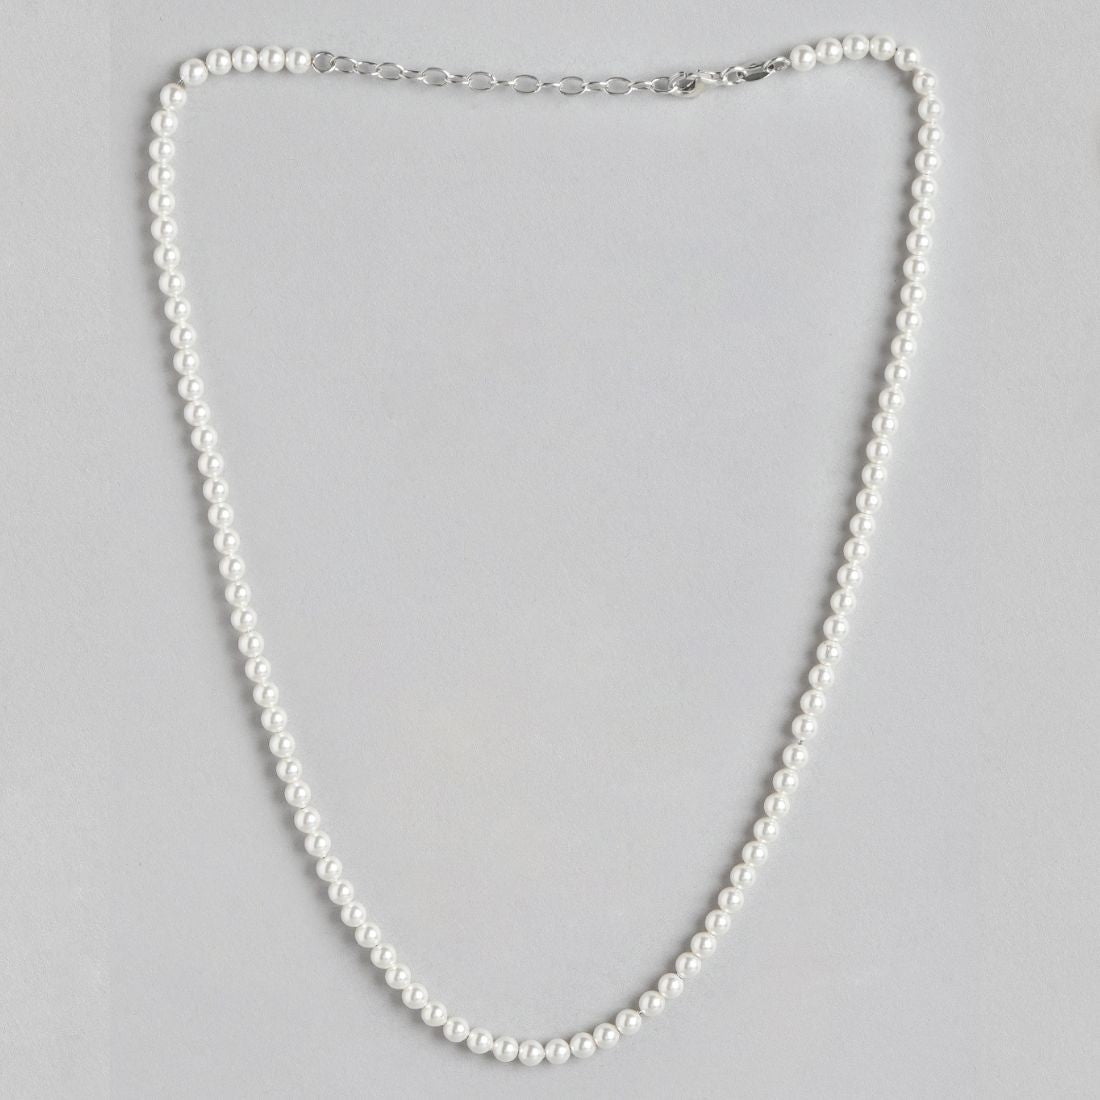 Freshwater Pearl Rhodium Plated 925 Sterling Silver Necklace